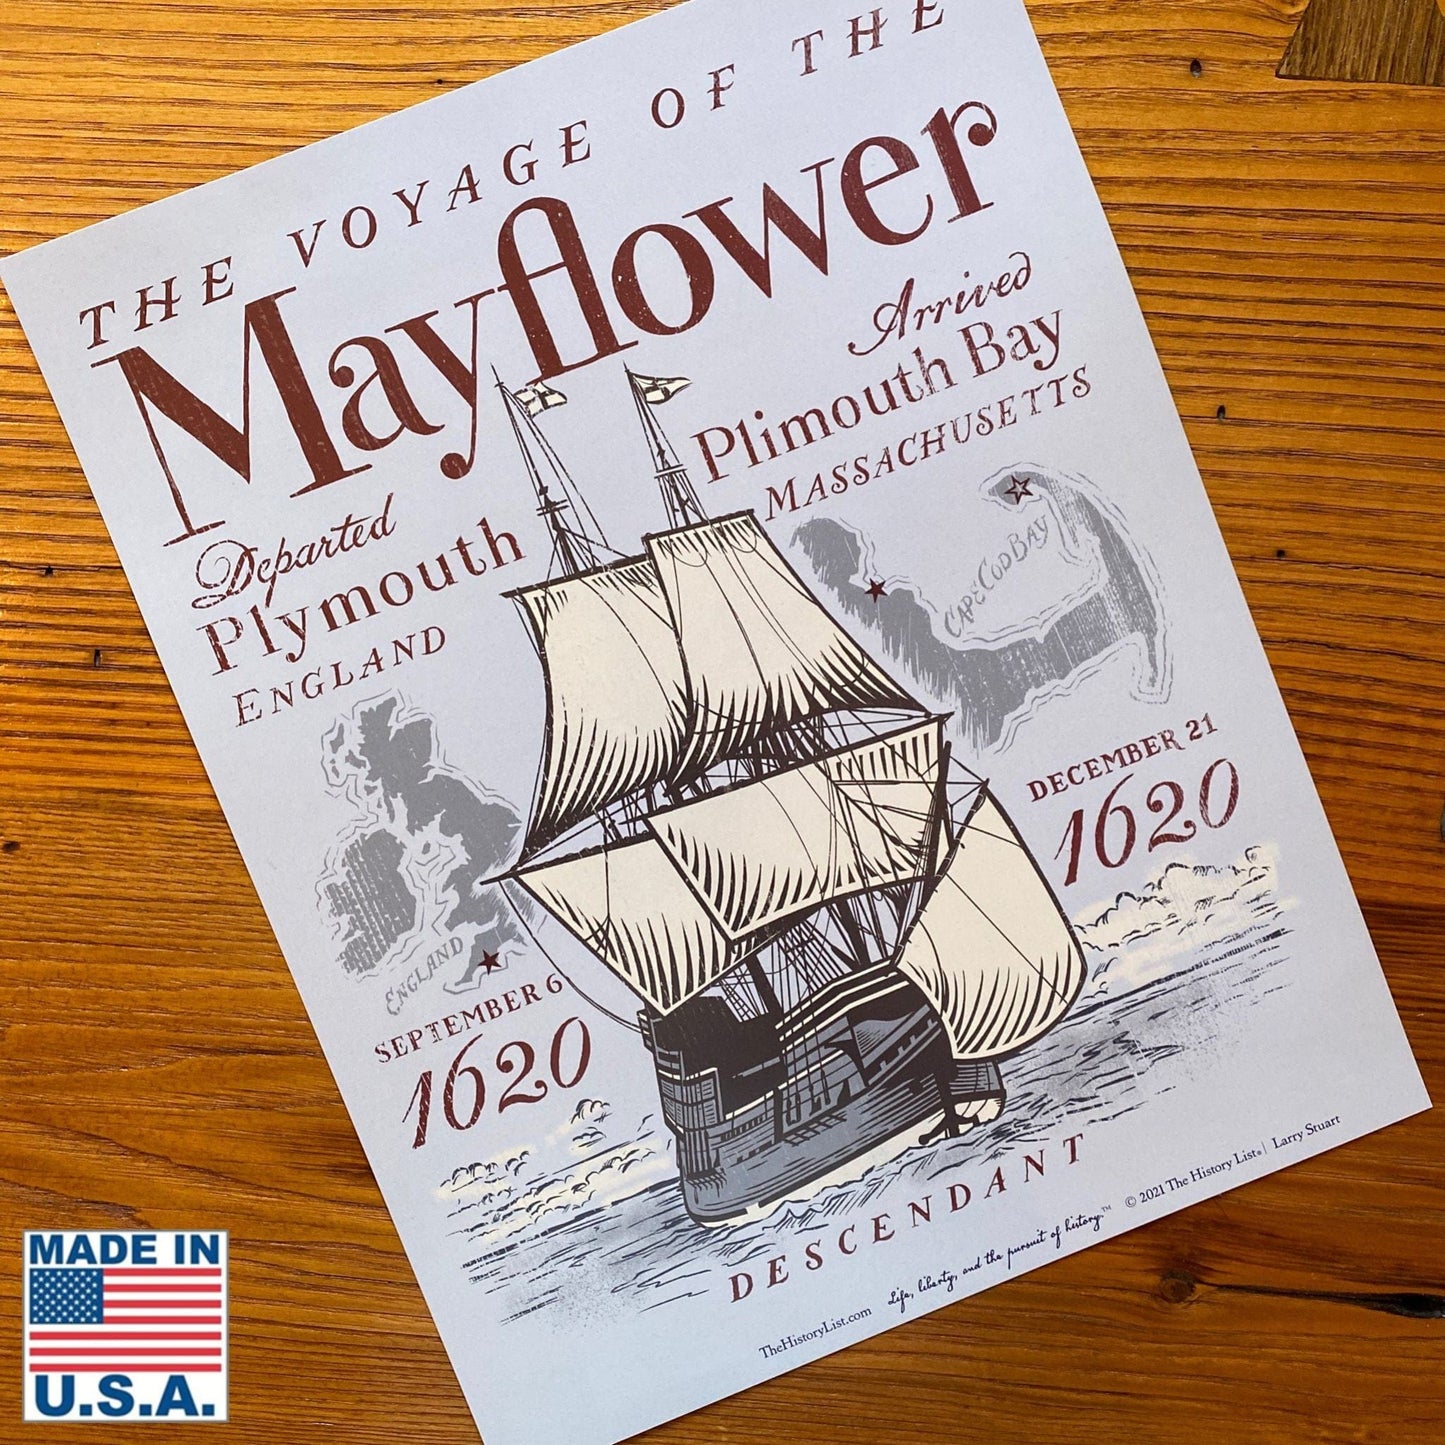 "The Voyage of the Mayflower" as a small poster from the History List Store